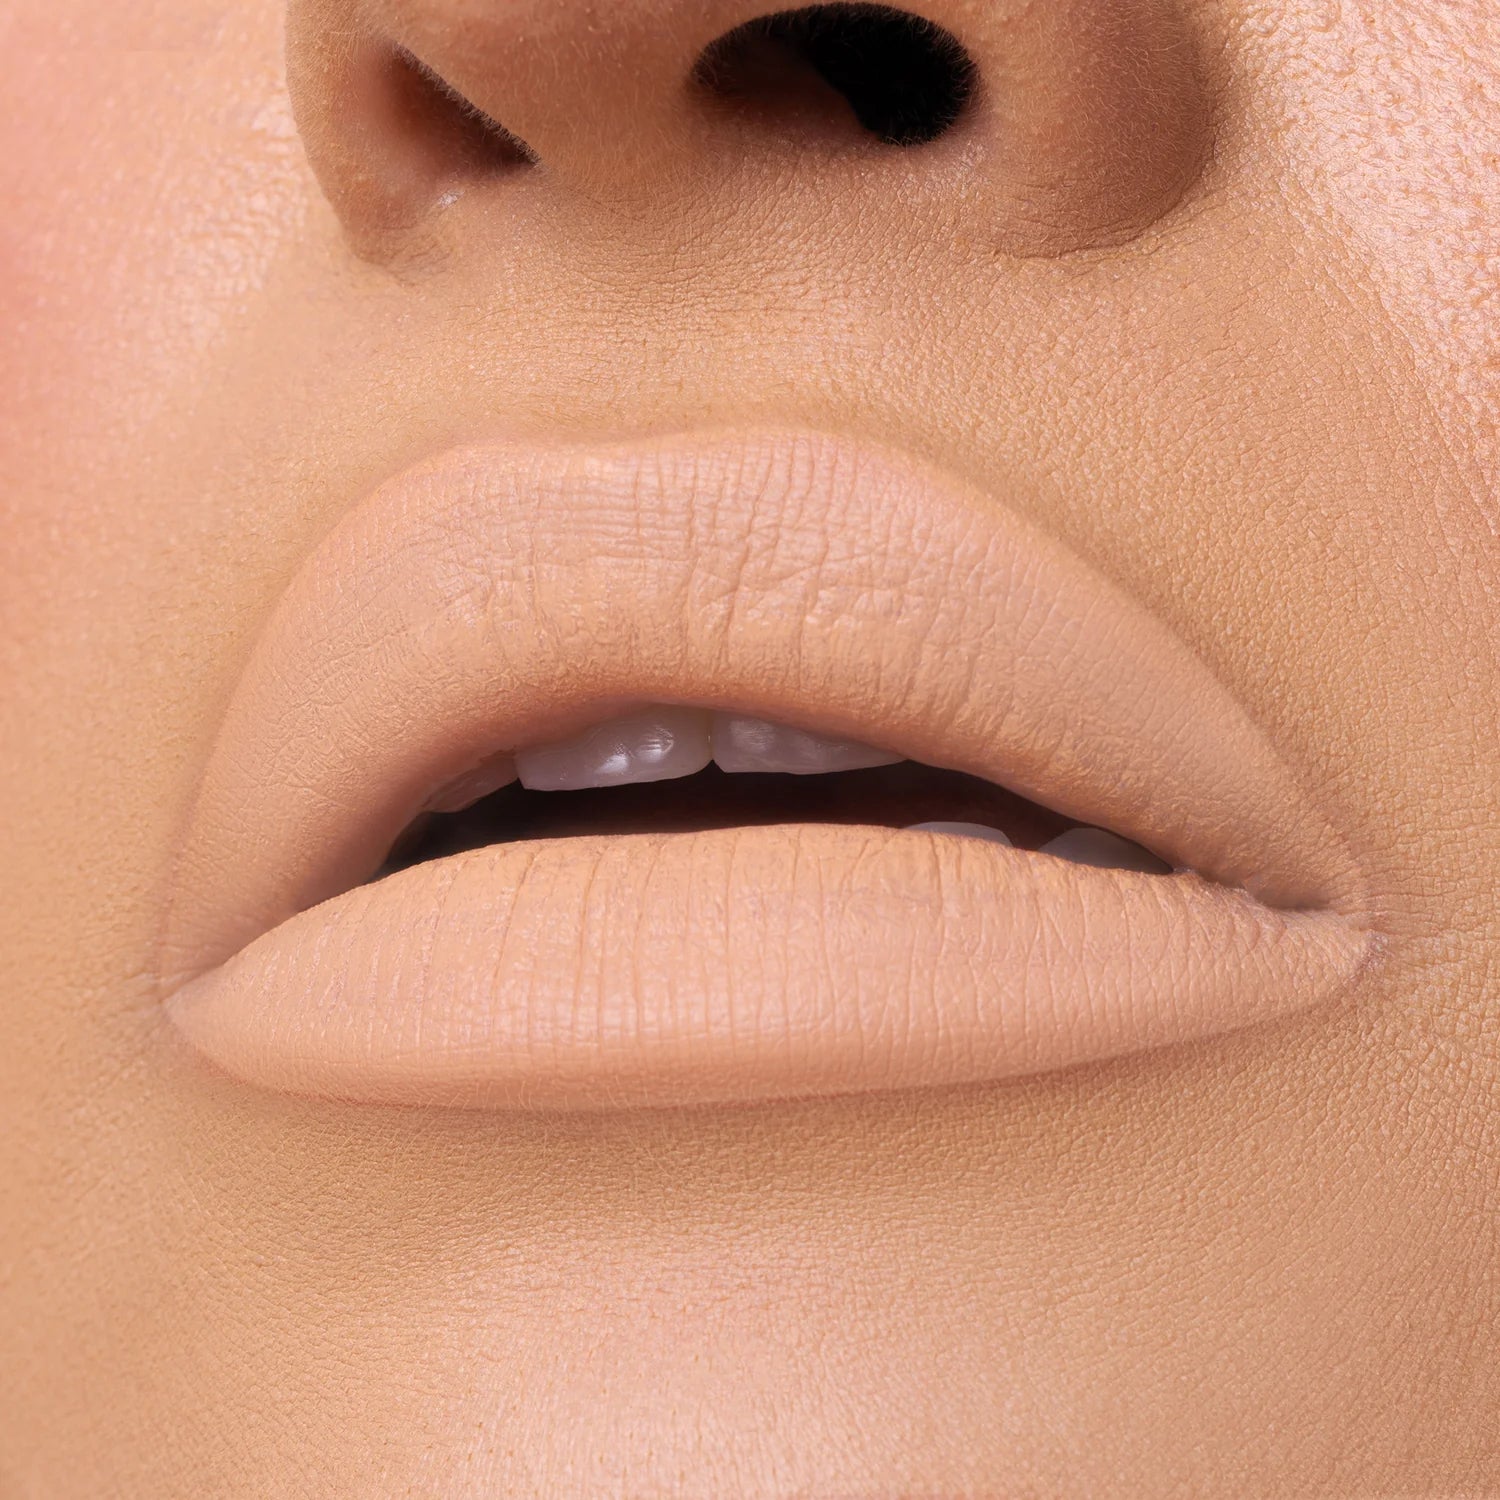 Beauty Creations - Nude X Lipstick Better Off Alone